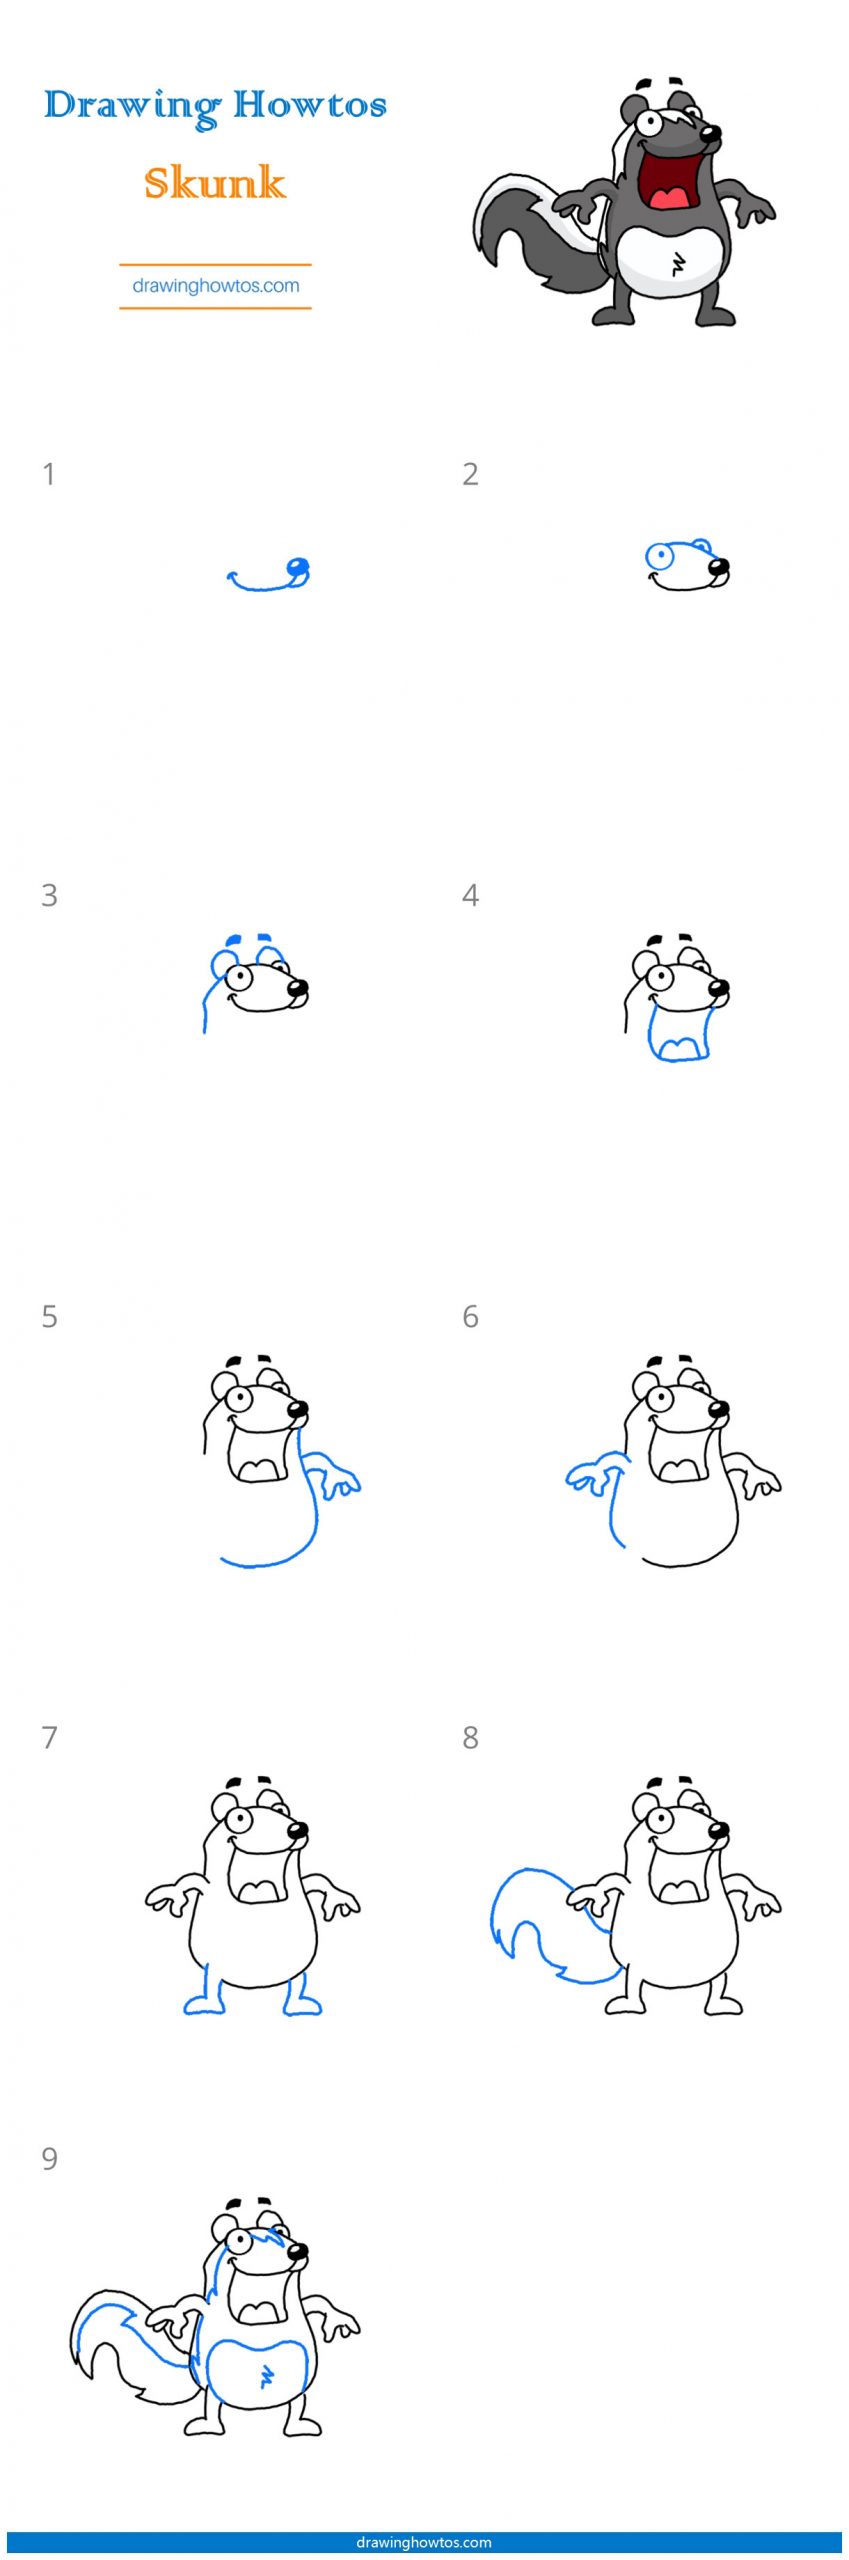 How to Draw a Skunk Step by Step